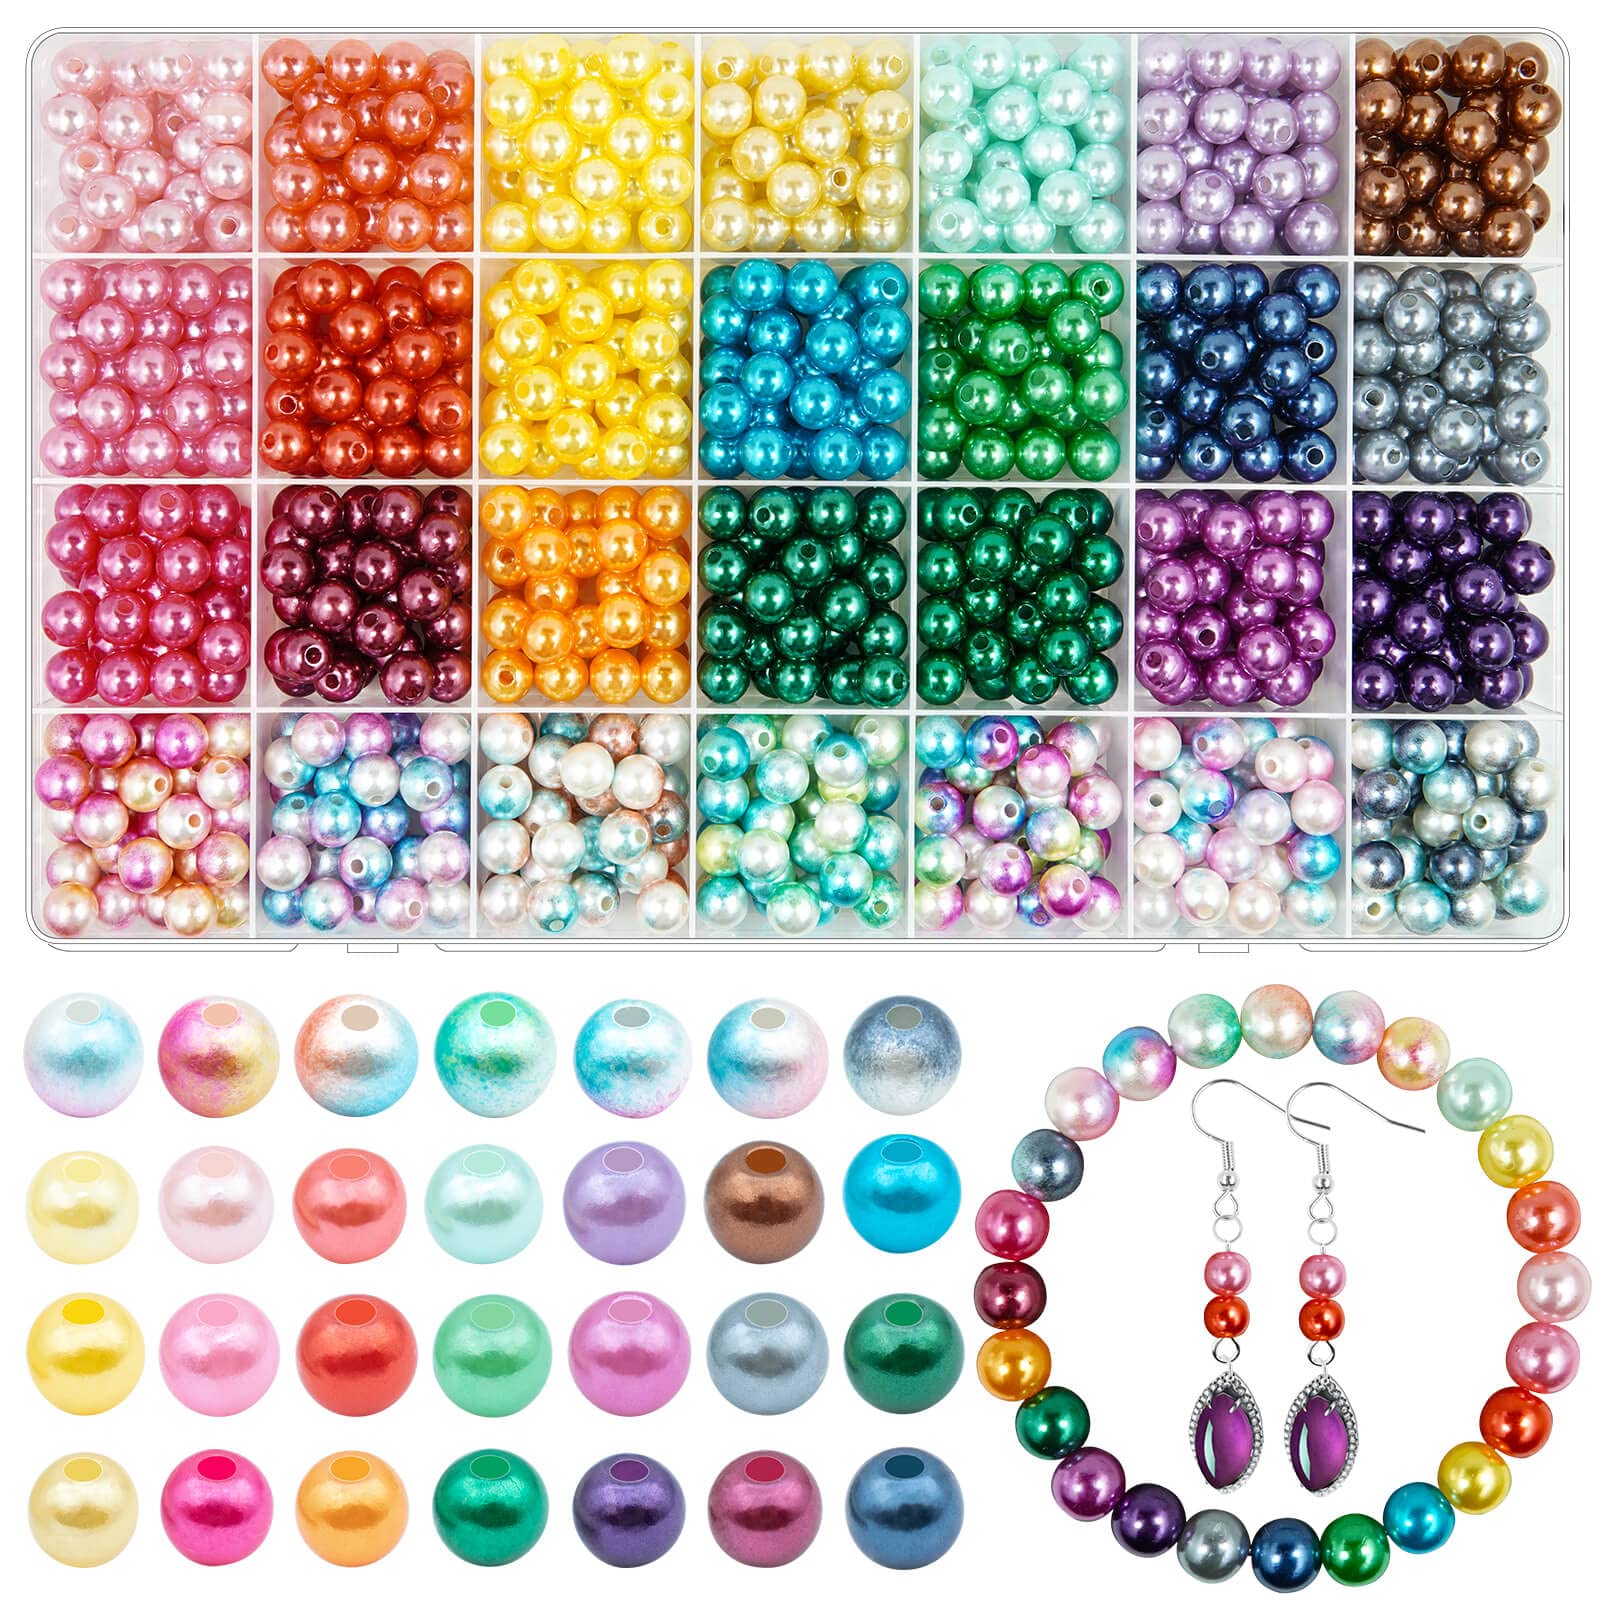 JHYlilia 900 Pcs 8MM Pearl Beads for Jewelry Making, 28 colors